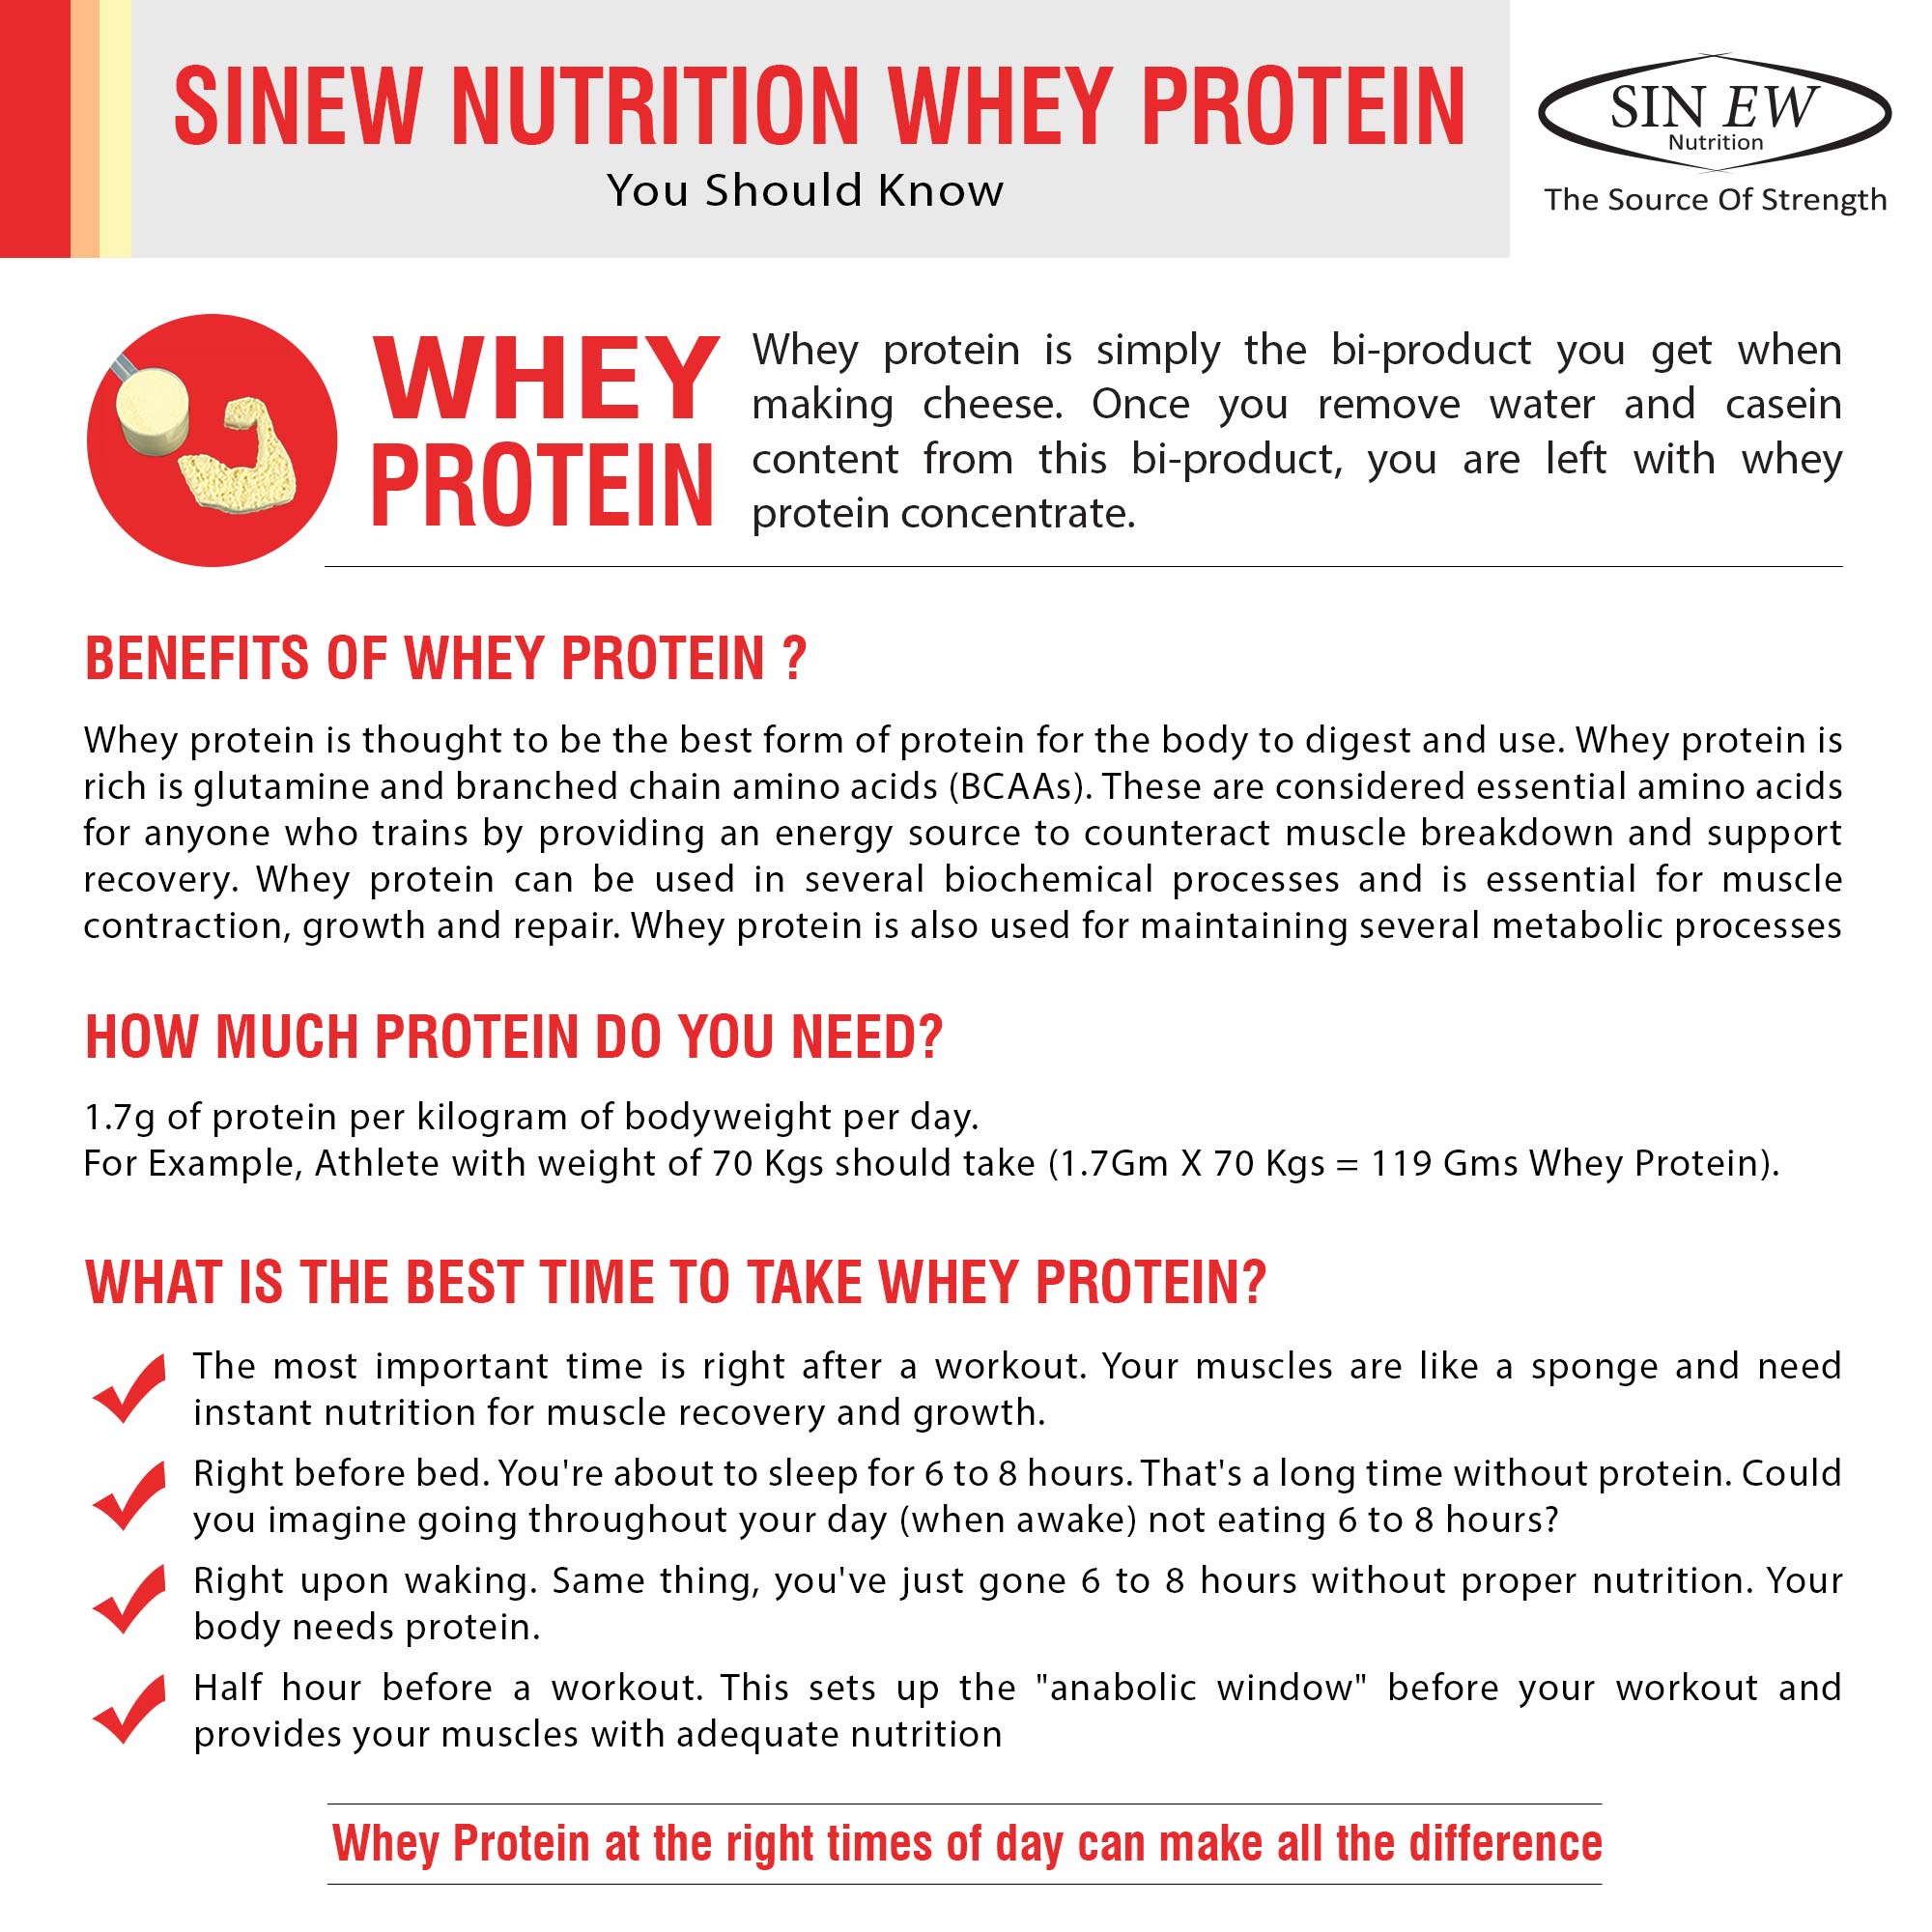 Whey Protein Image Red